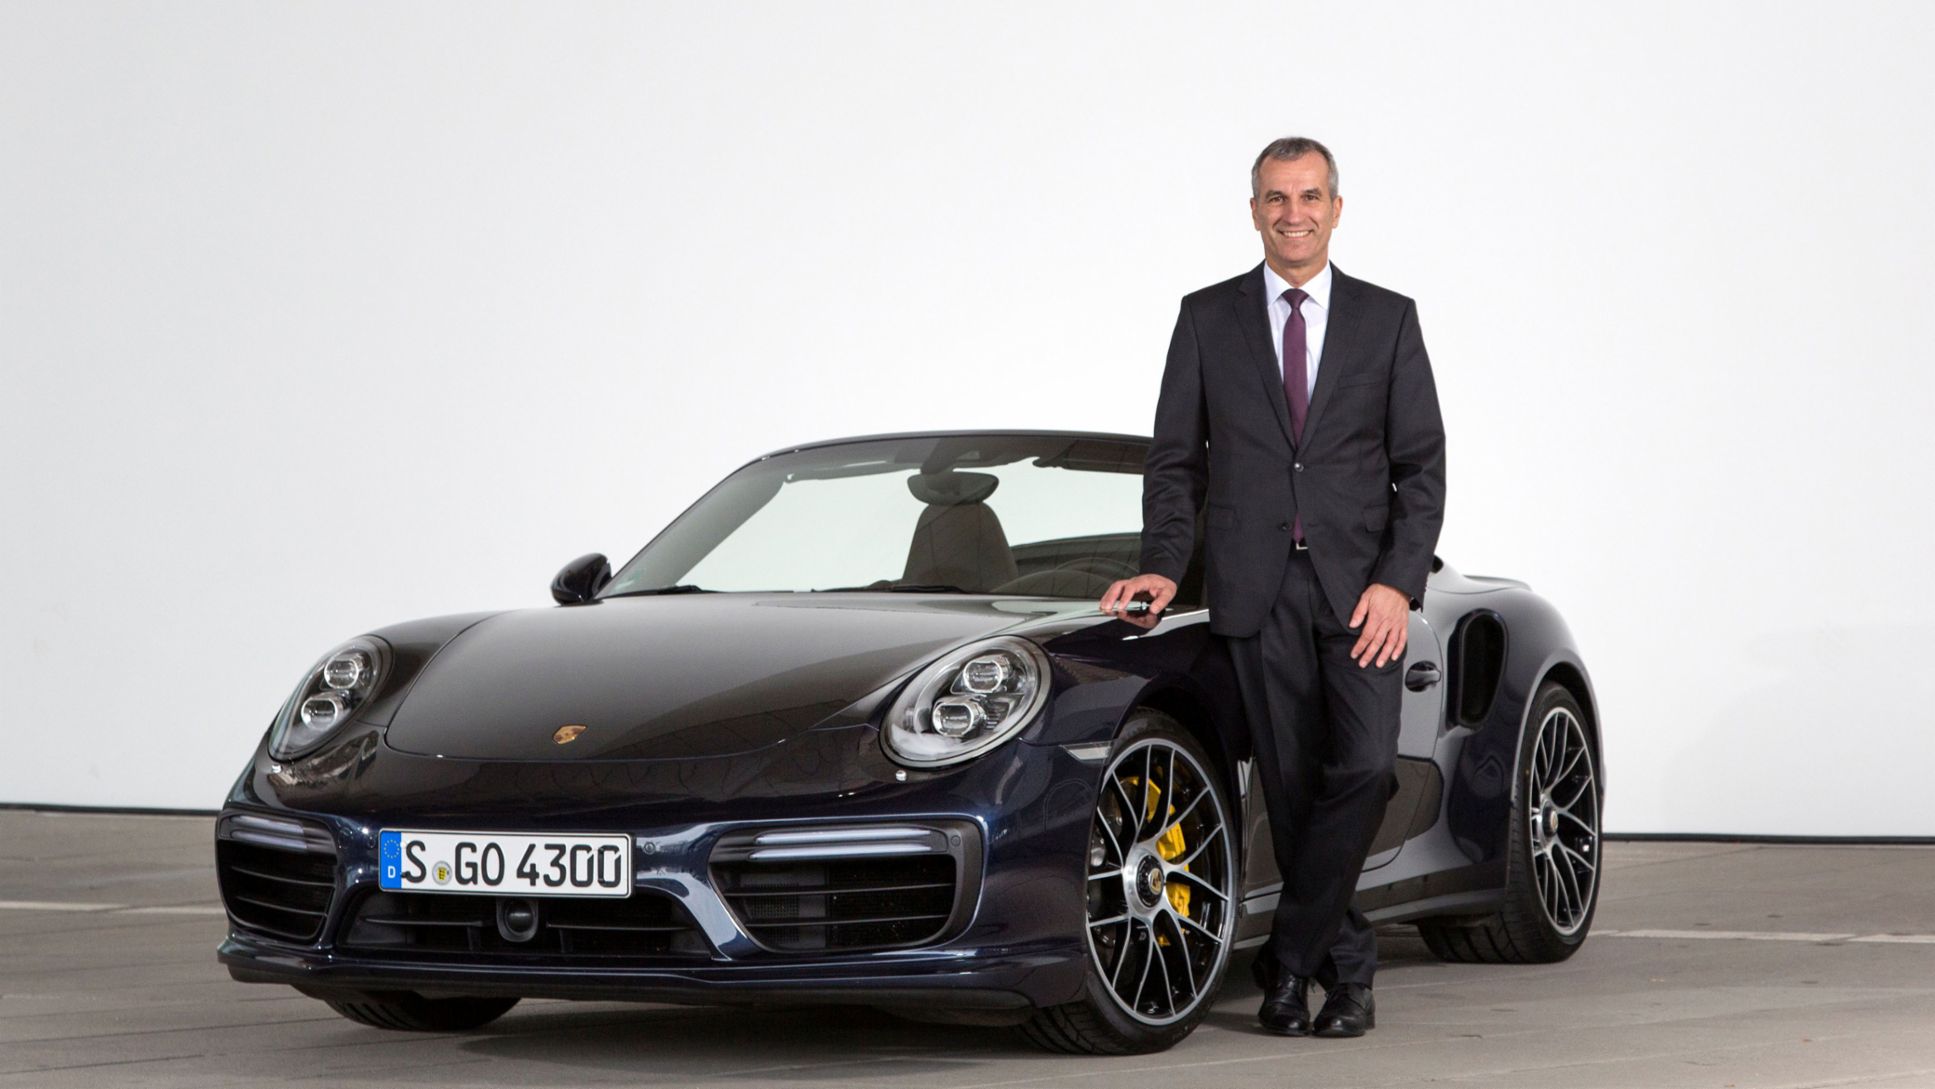 Albrecht Reimold, Member of the Executive Board for Production and Logistics, 2018, Porsche AG 